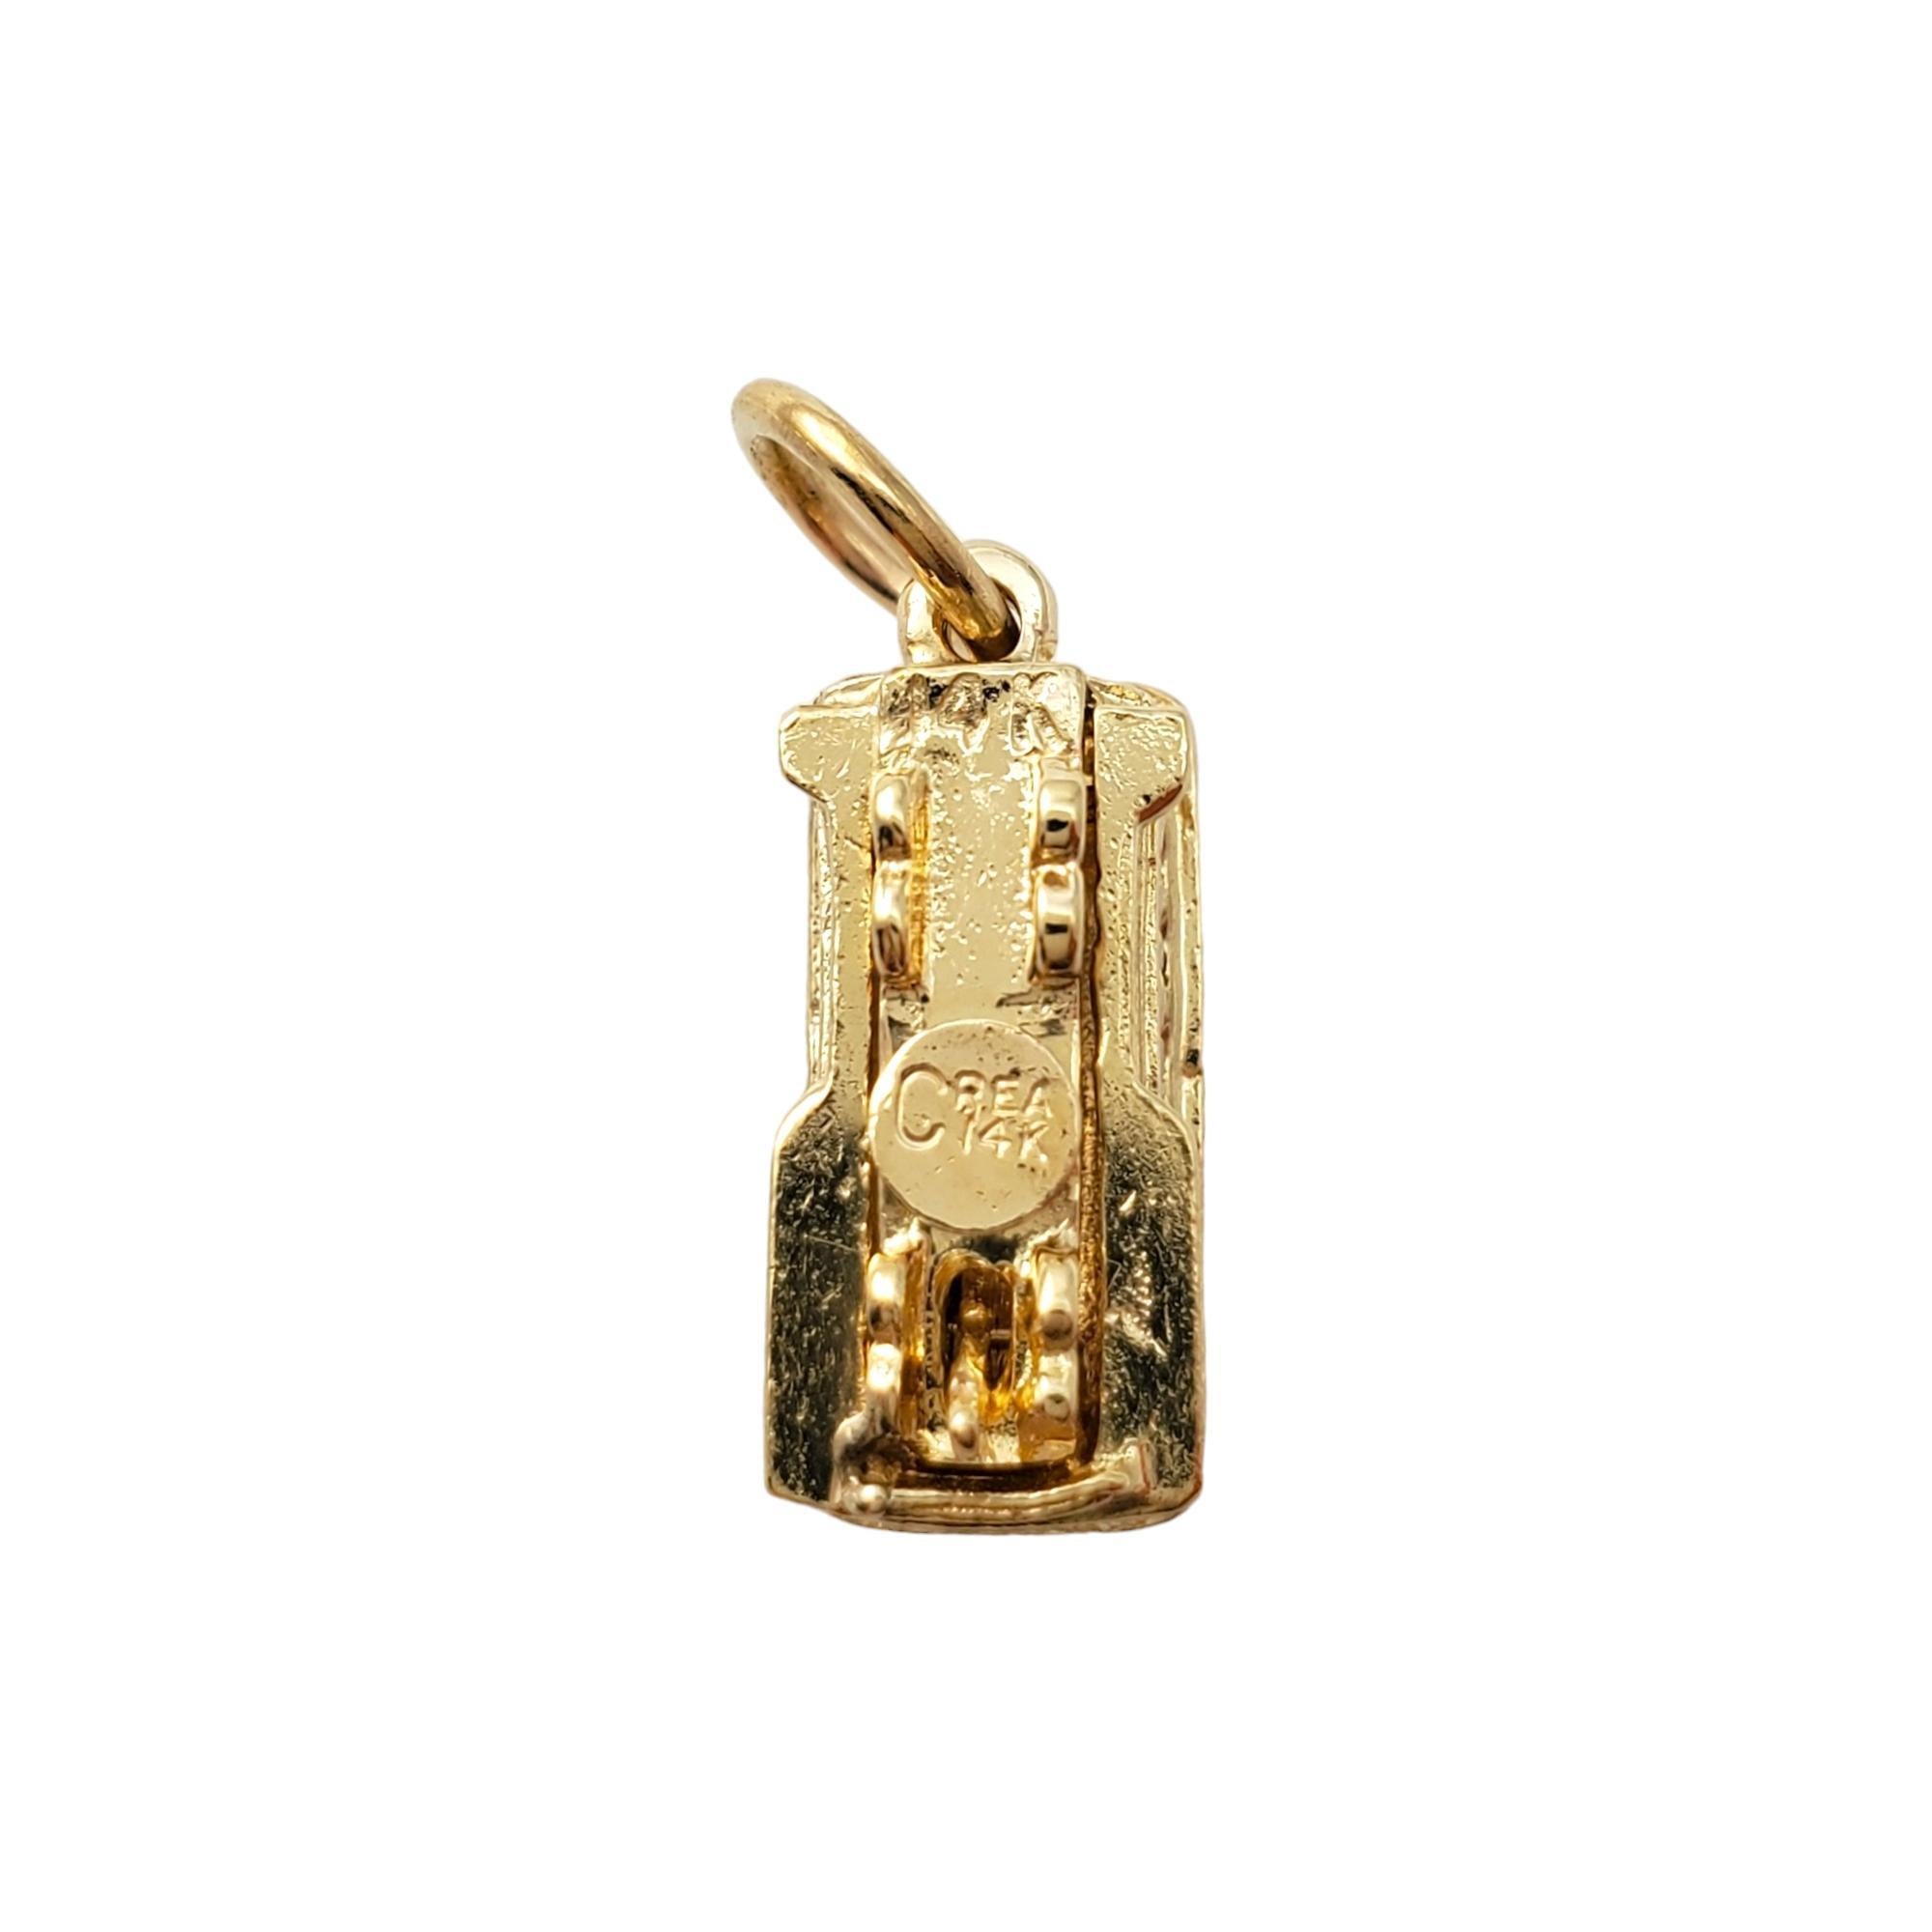 Powell-Mason 14K Yellow Gold Trolley Charm #16595 For Sale 3